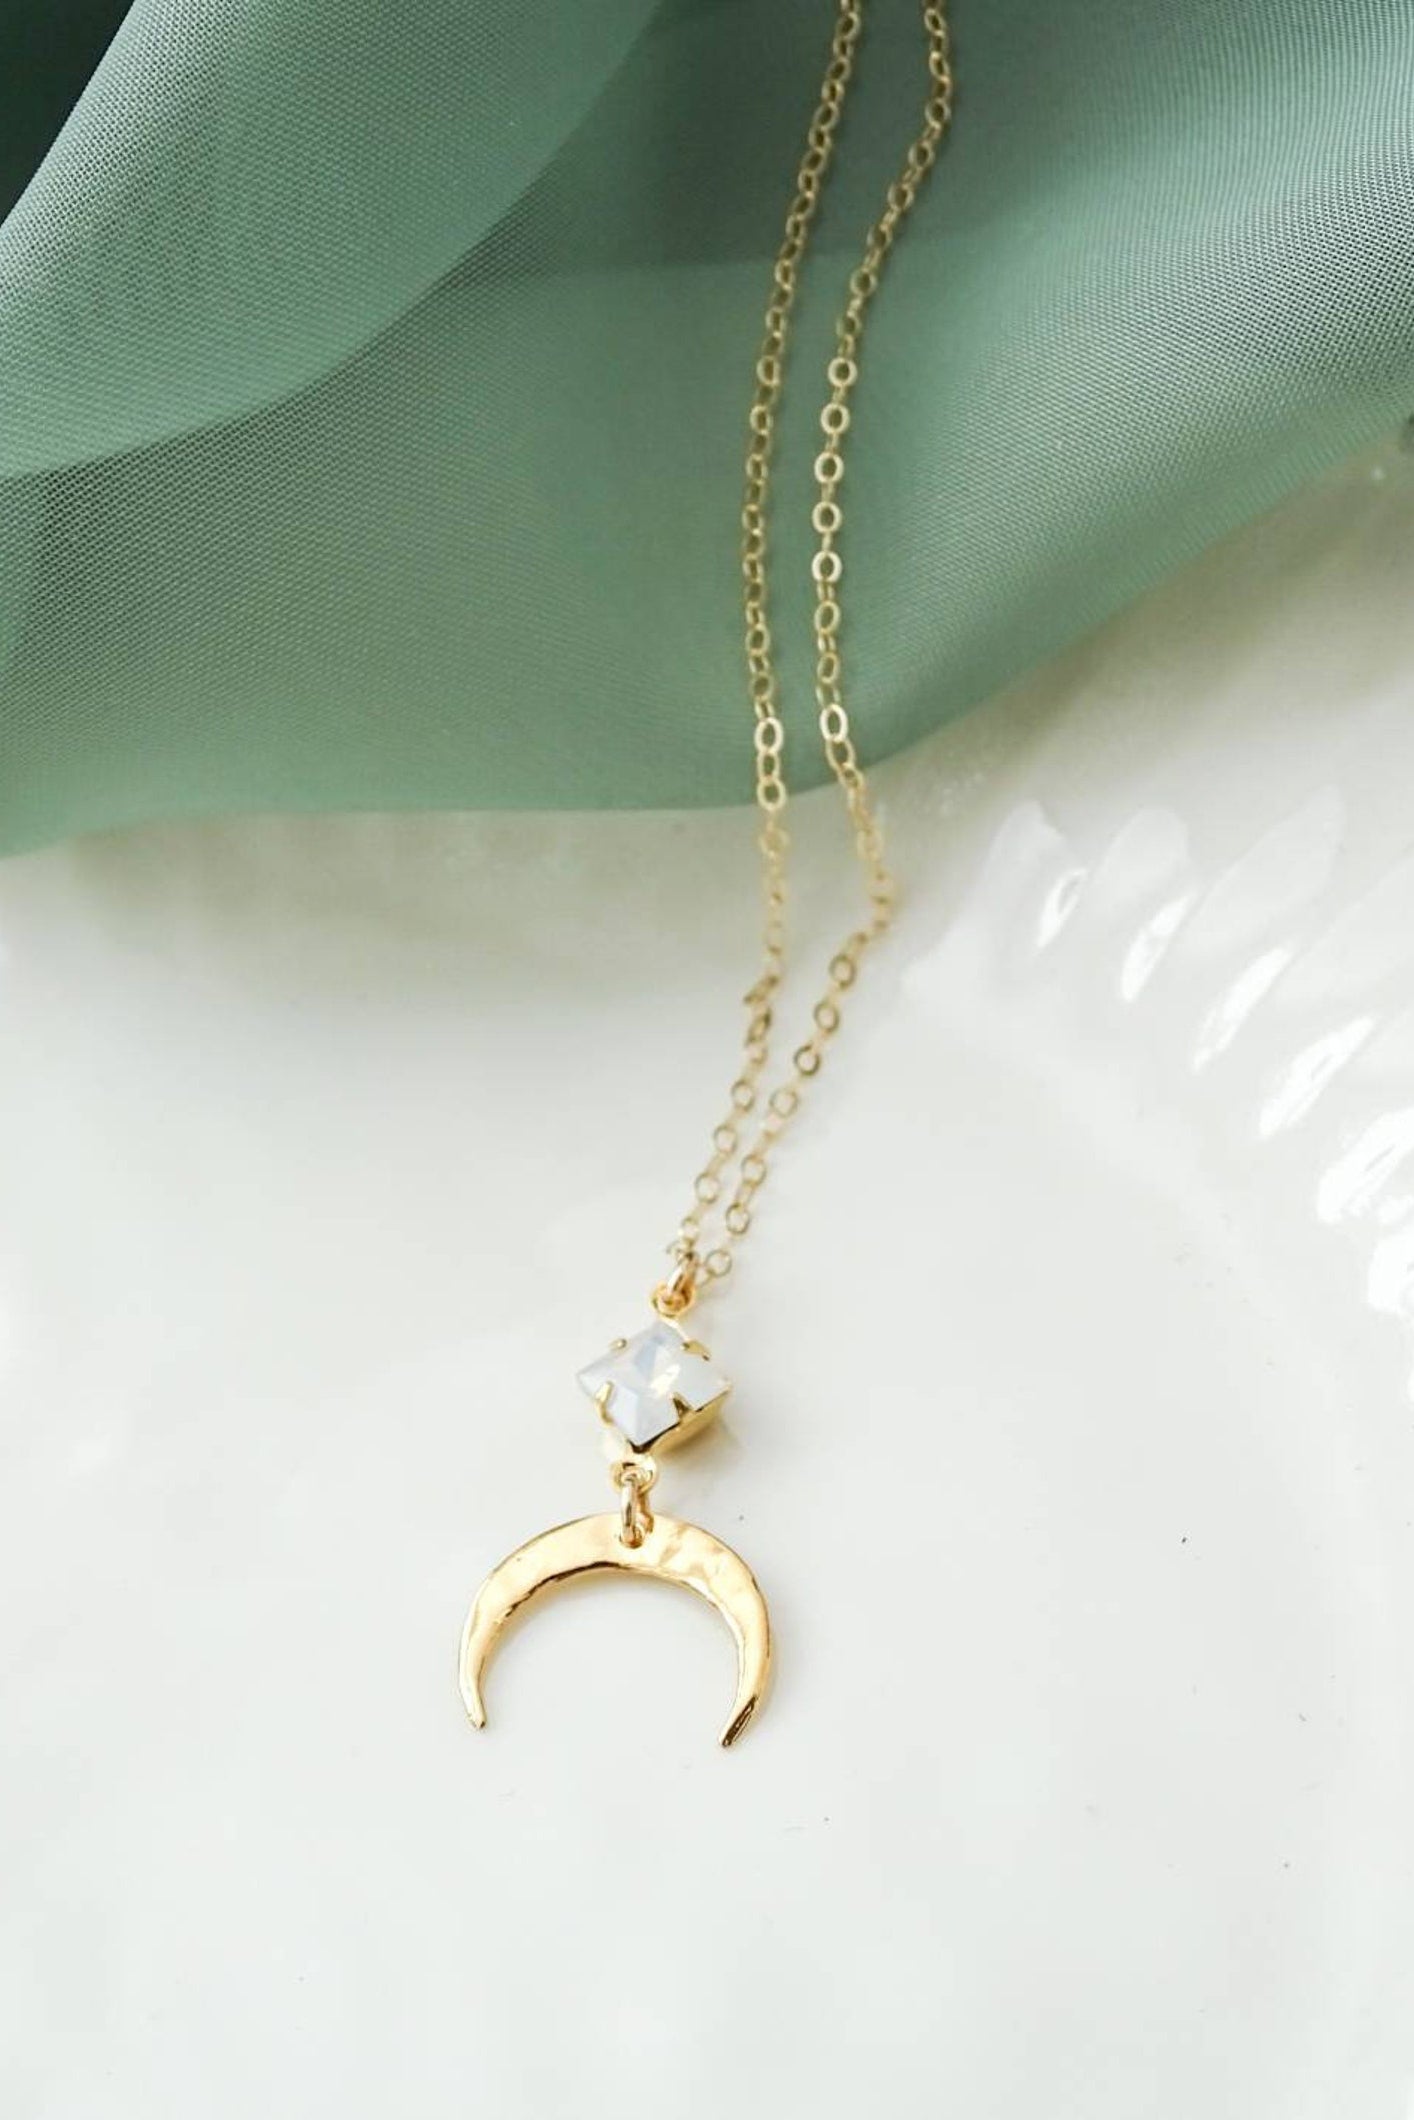 Moon Glow Necklace - Black or Opal